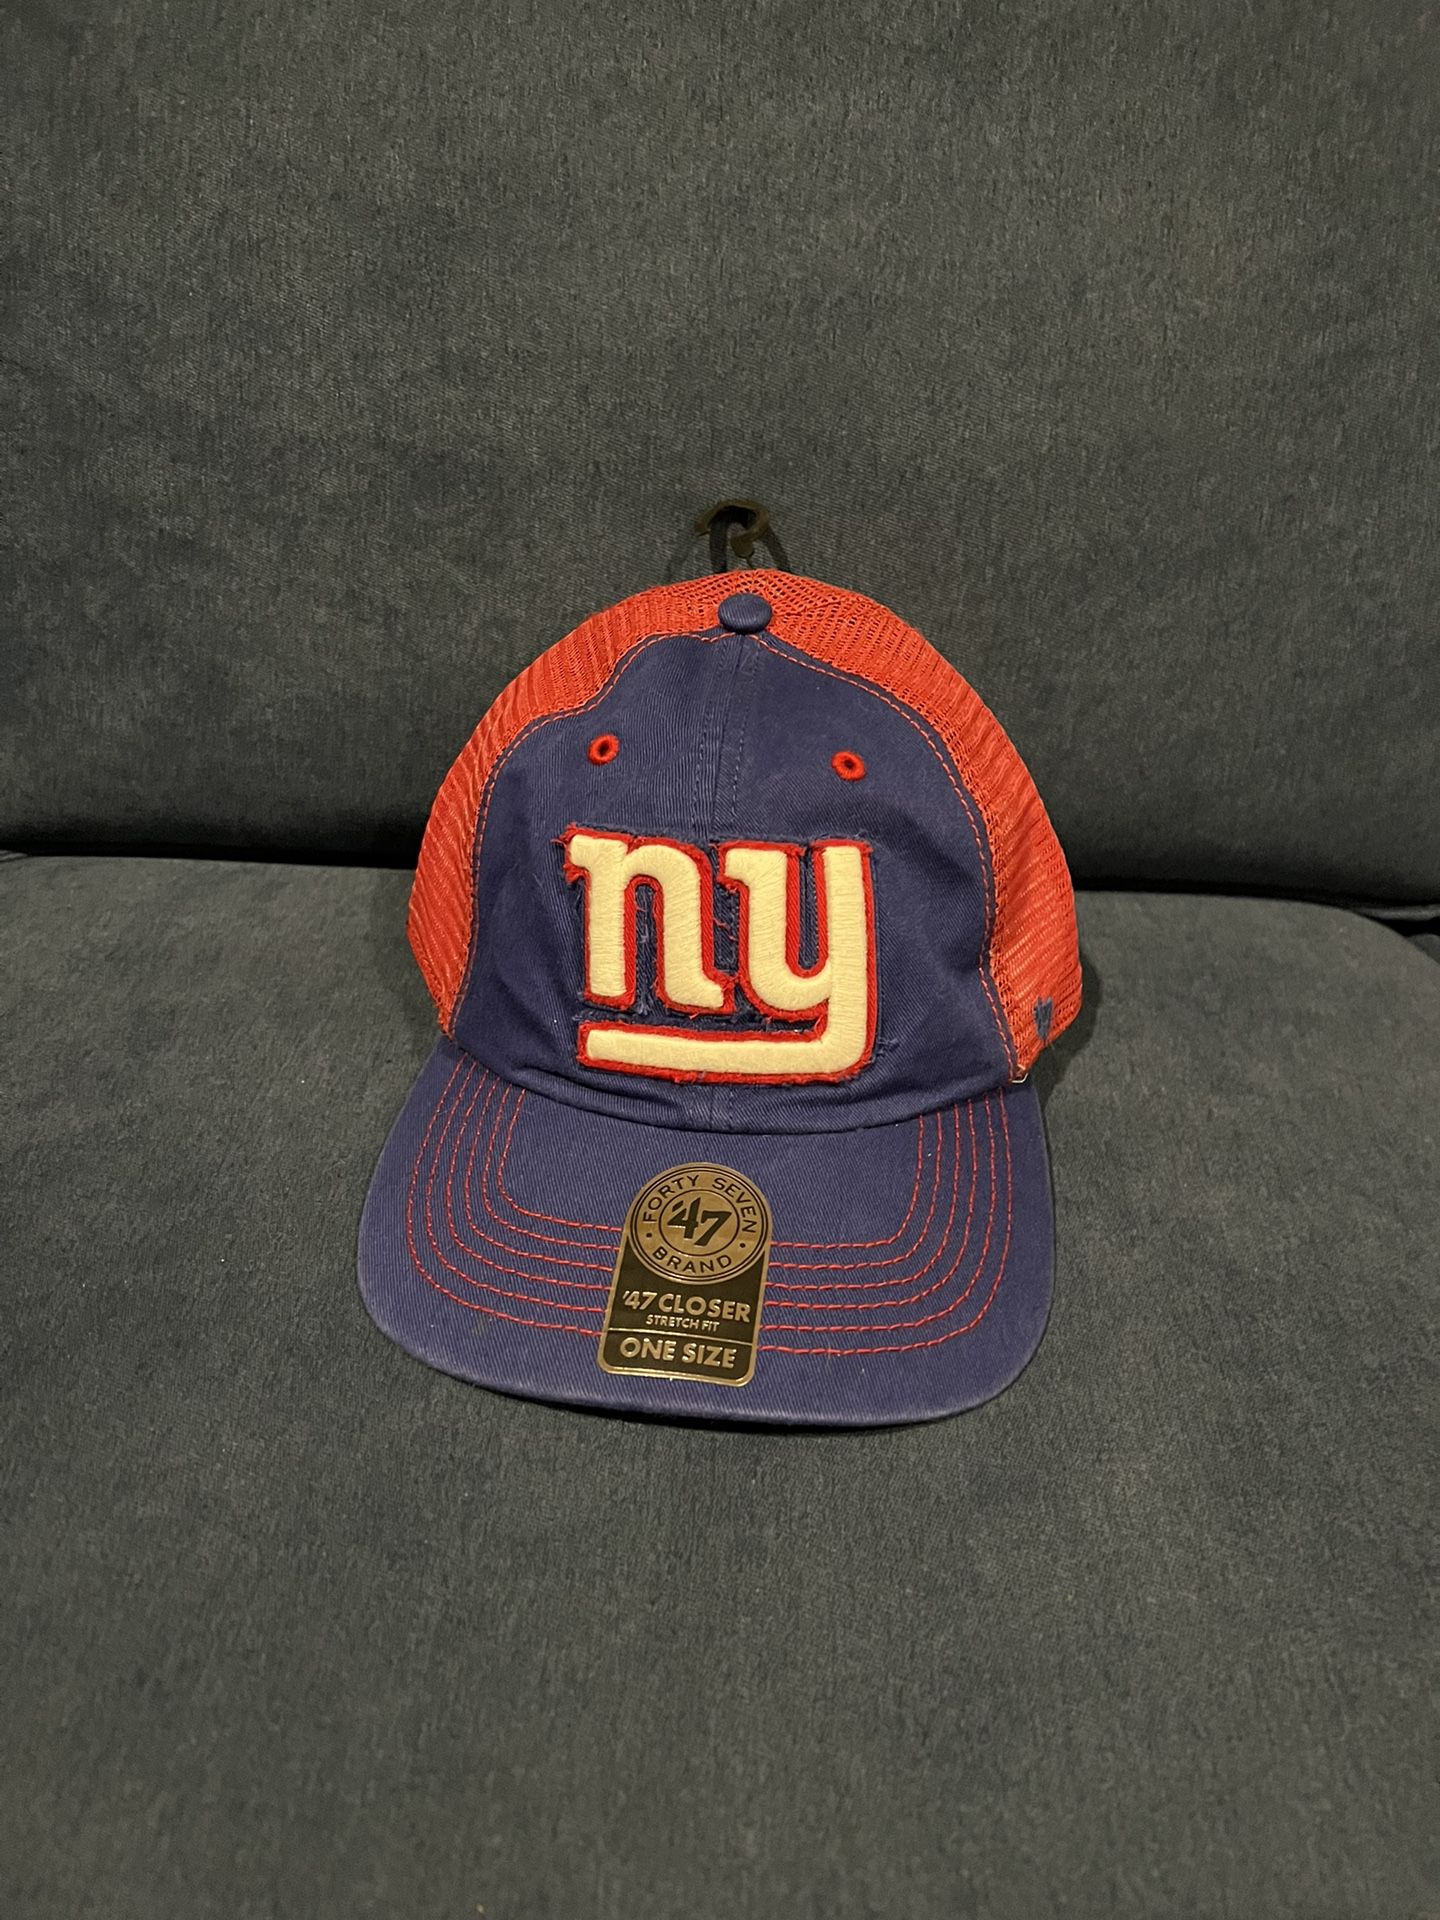 New York Giants Cap/Hat Brand New With Tags In Team Colors